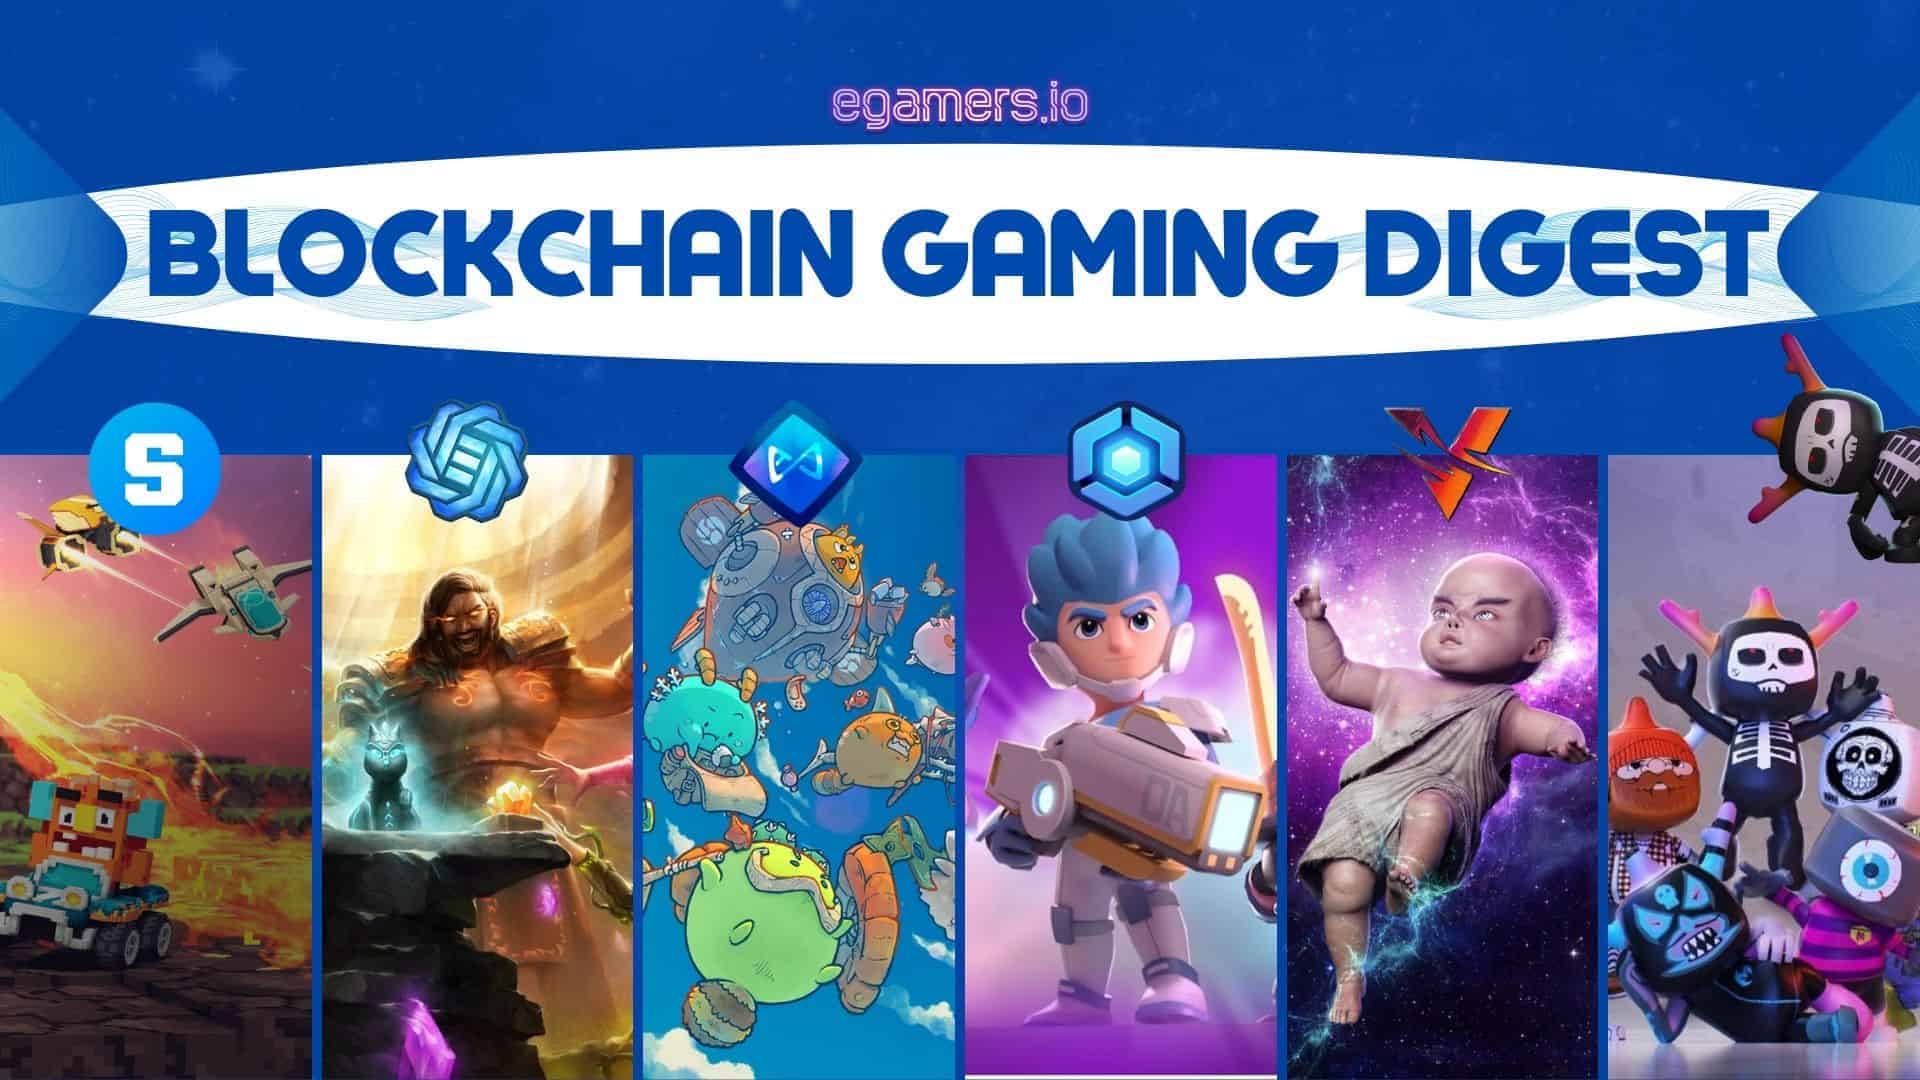 BLOCKCHAIN GAMING DIGEST new Even though the overall crypto market was red in May, crypto games and web3 projects were performing well. 